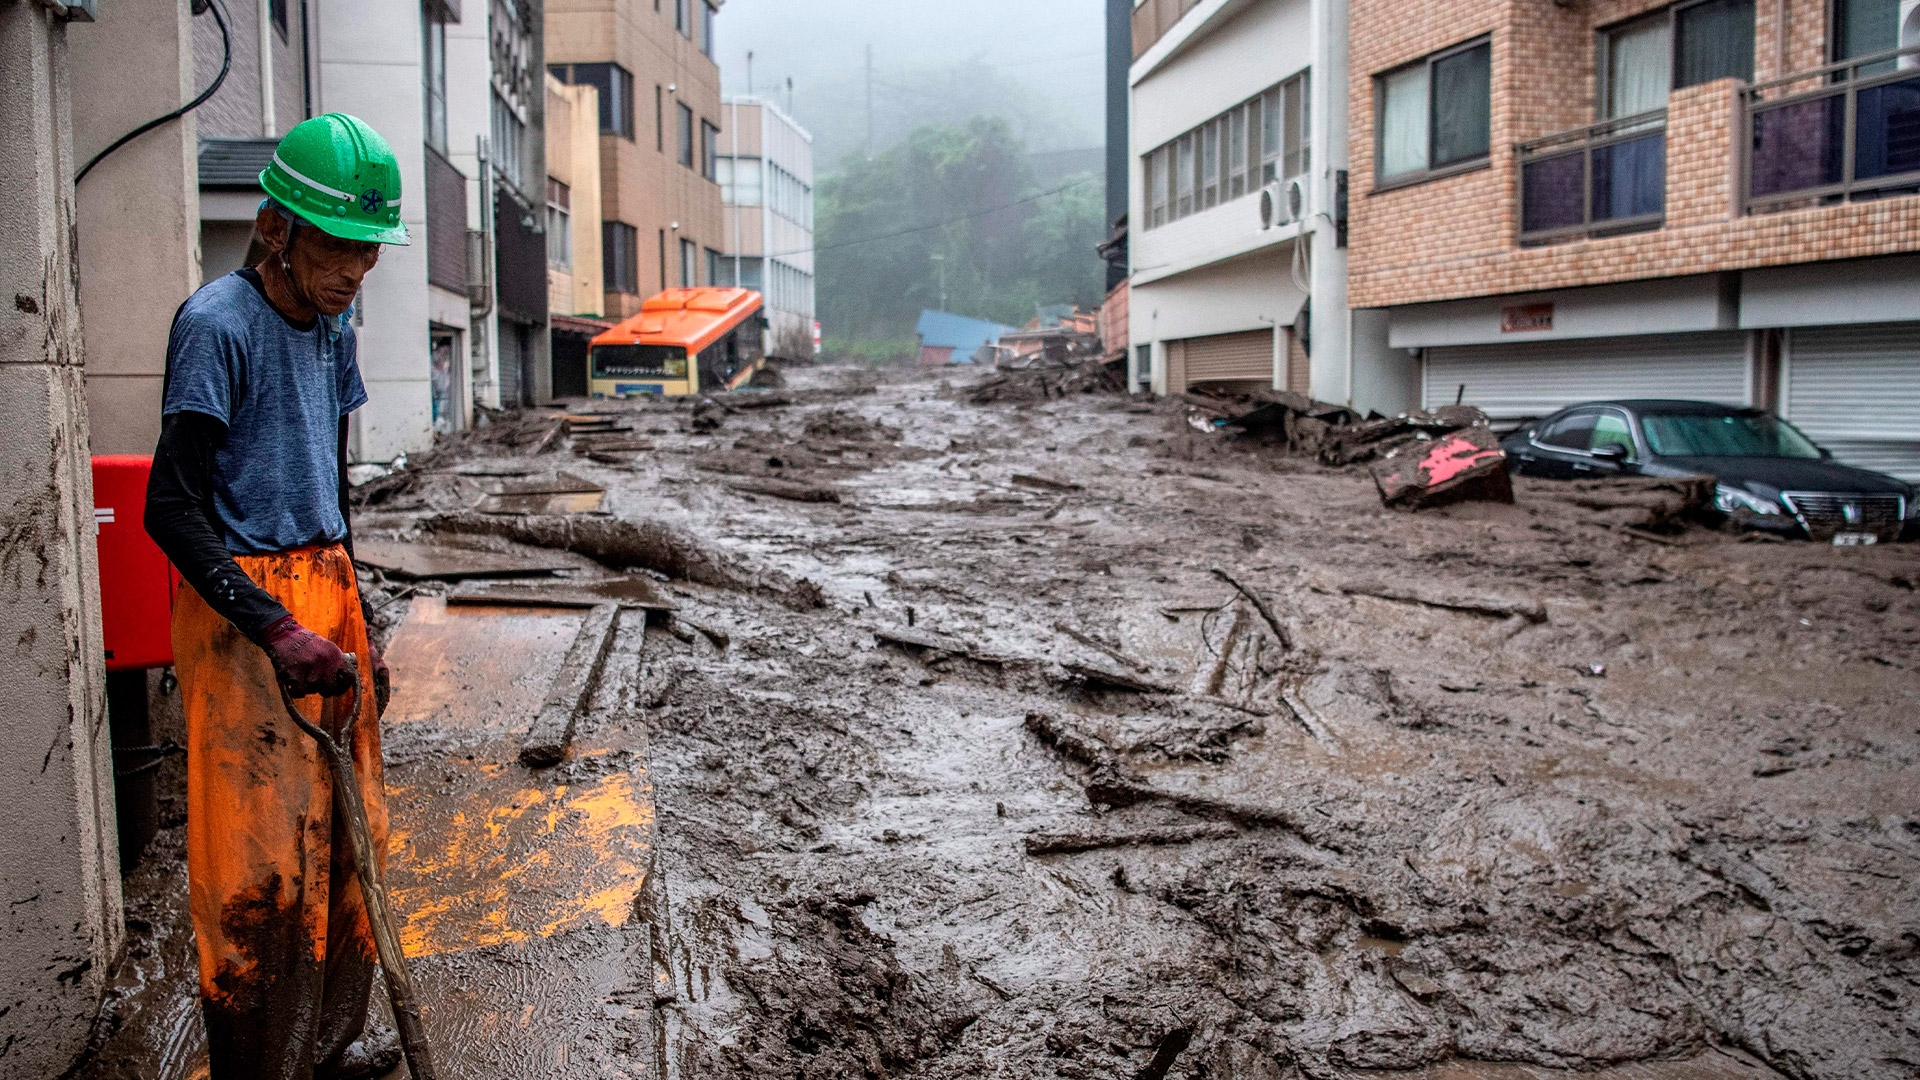 20 people are missing and 2 are dead in Japan due to landslides